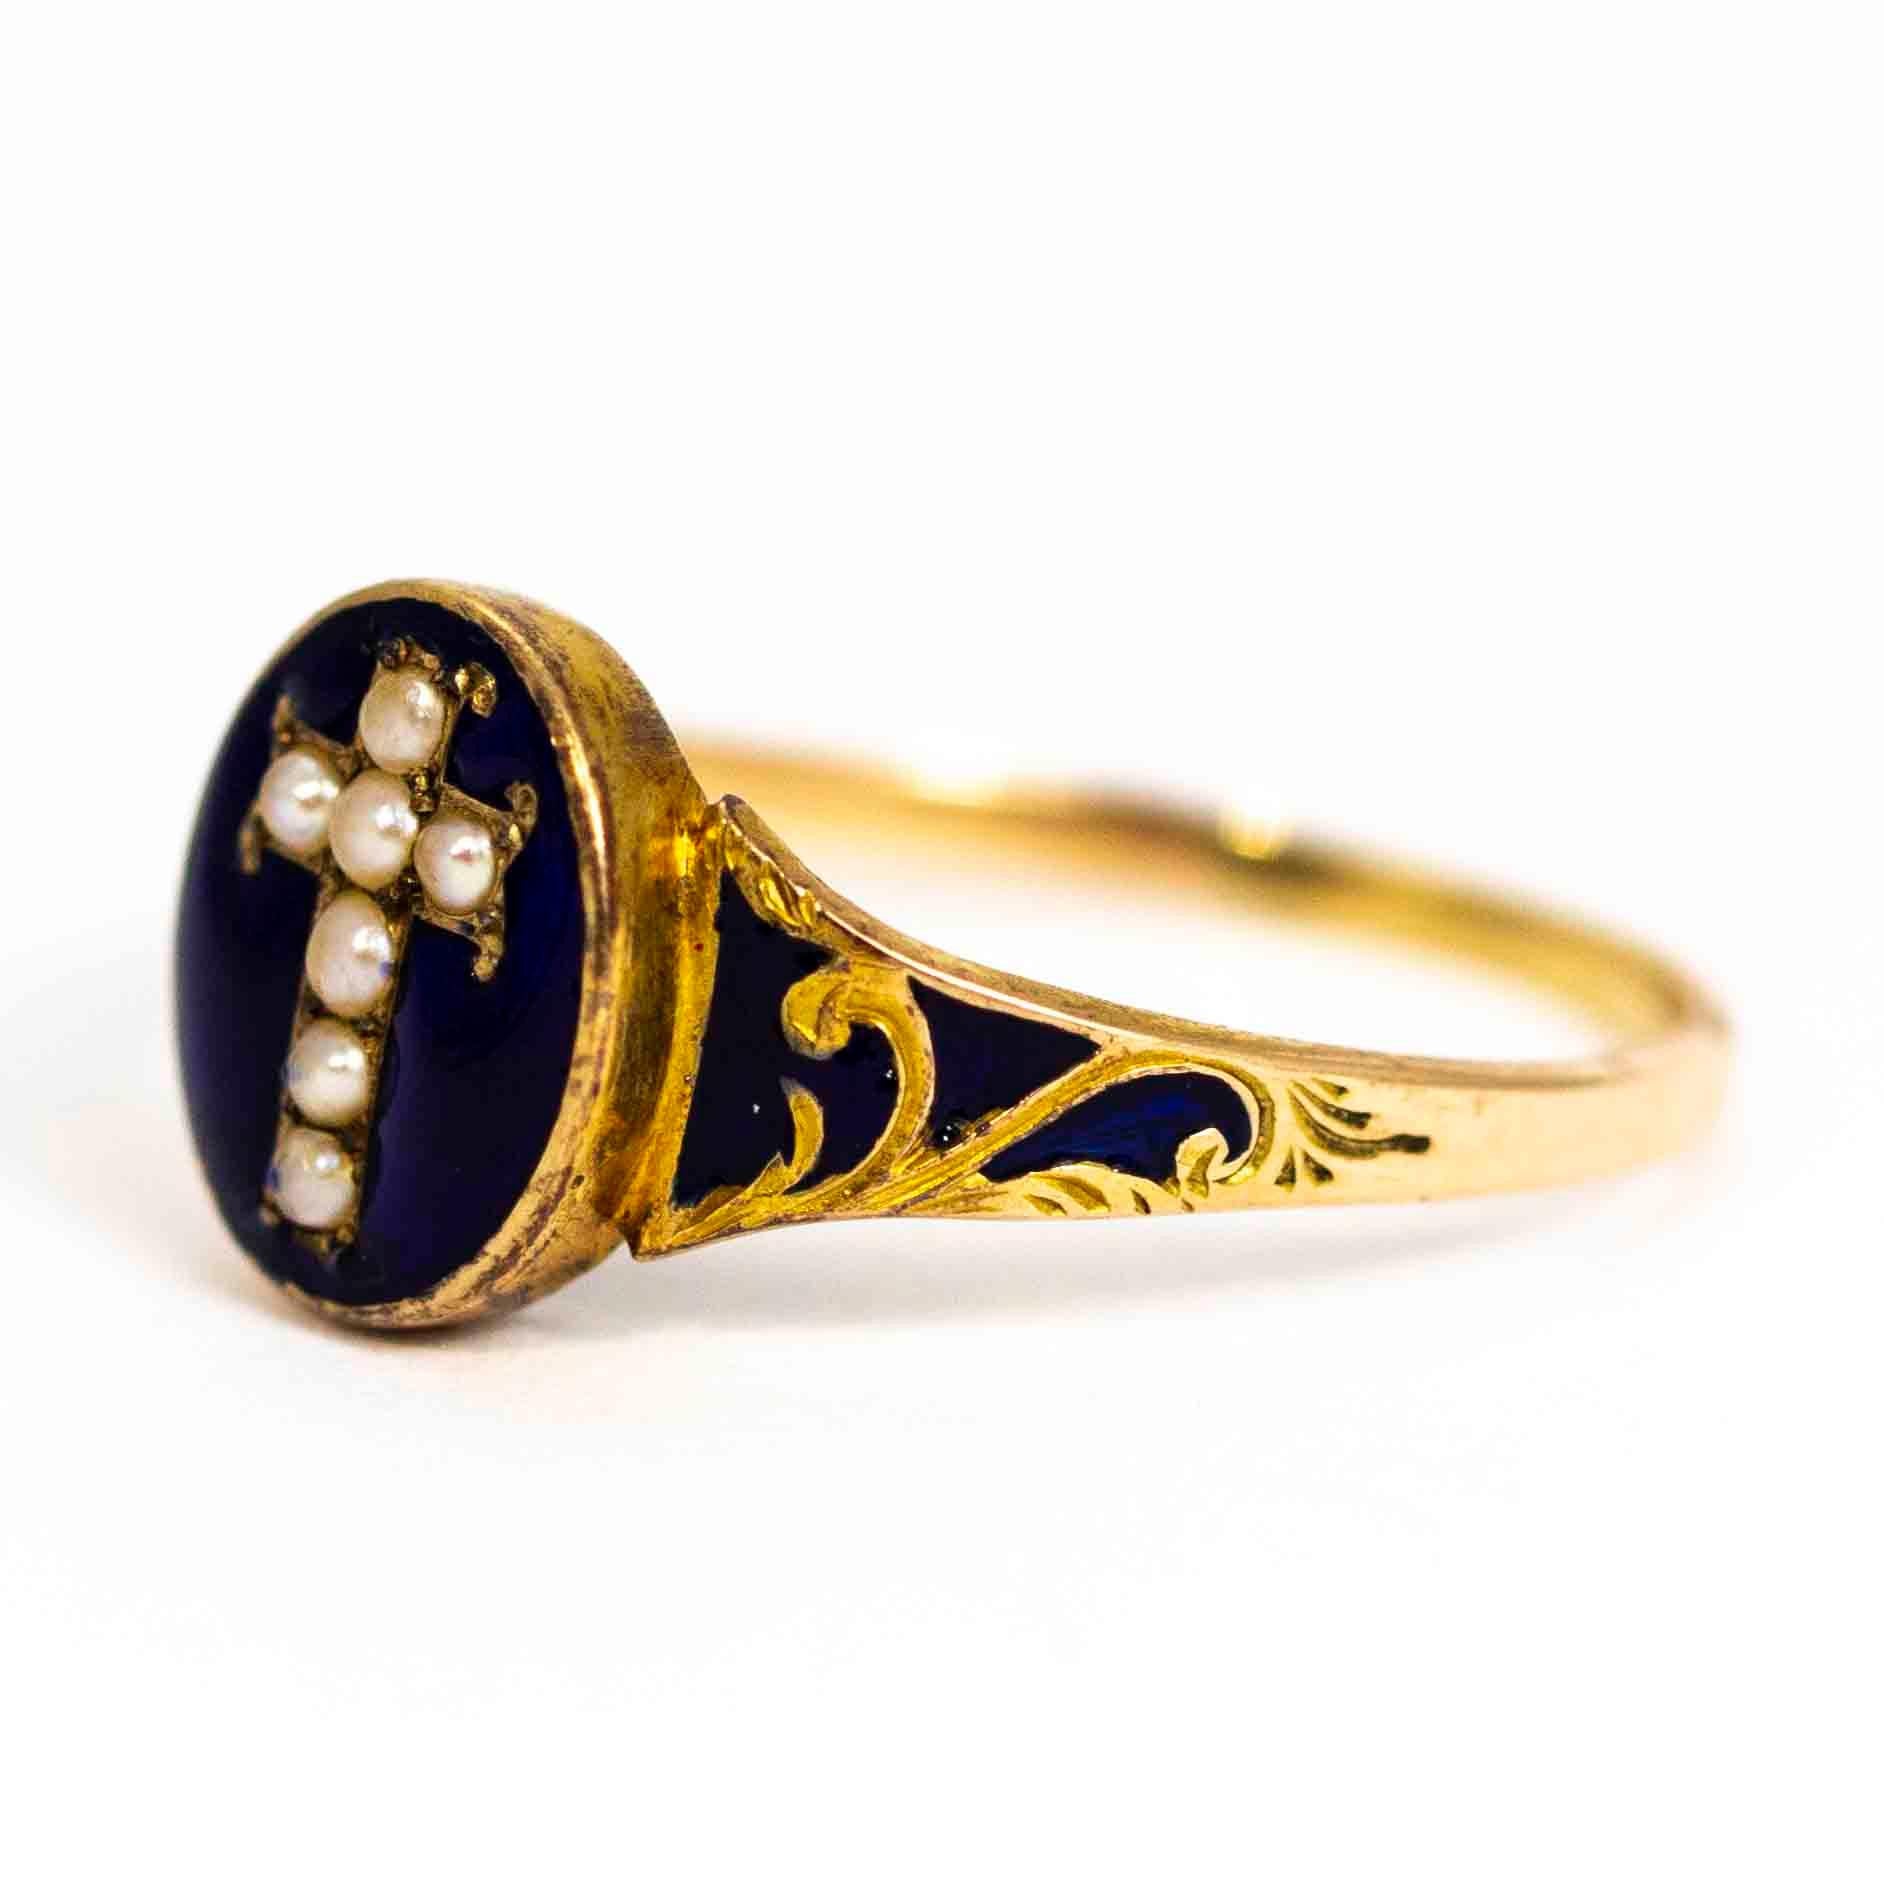 An exquisite antique Victorian mourning ring. Fronted with a superb pearl cross surrounded by glossy royal blue enamel. The oval panel is backed with a glazed locket. The elegant shoulders are set with ornate gold detailing and more beautiful